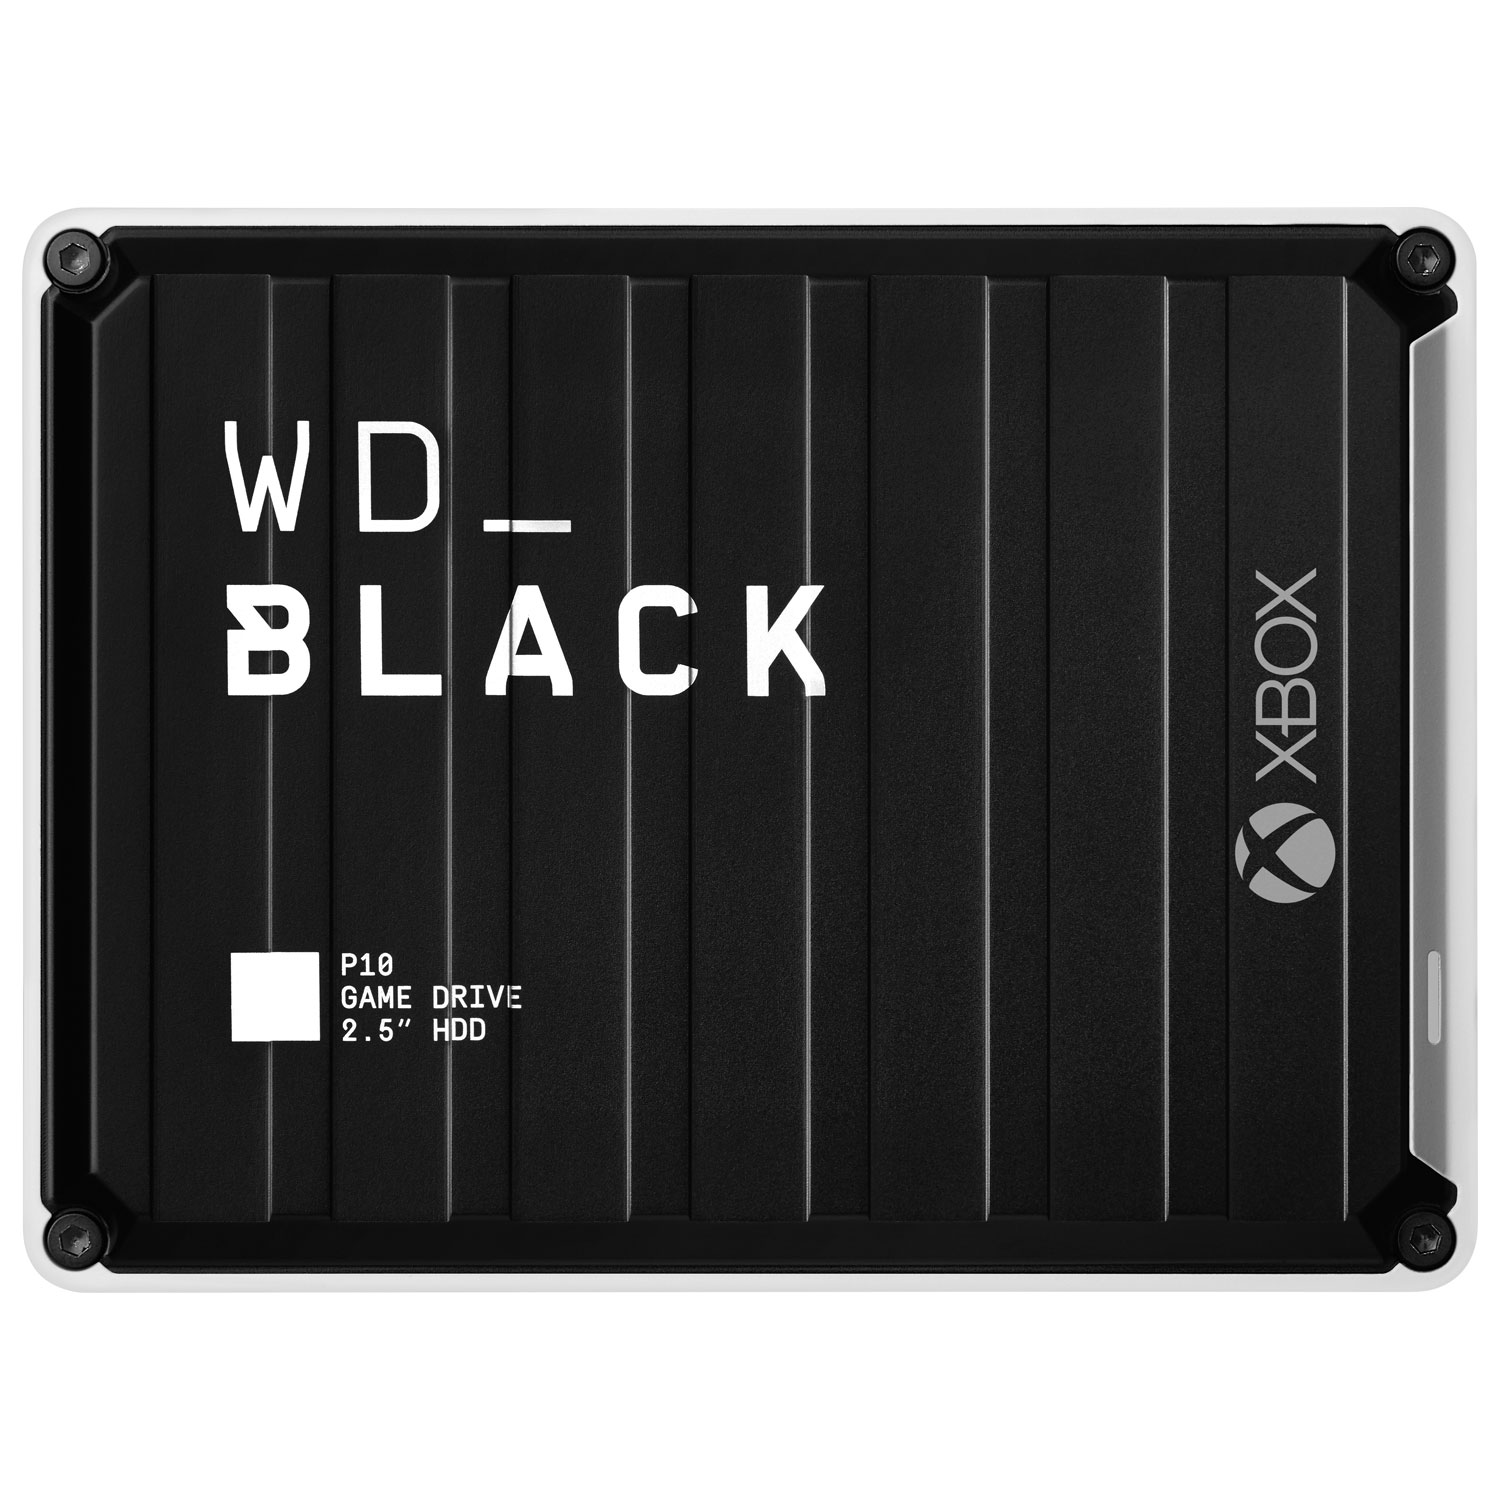 WD_BLACK P10 4TB External Game Drive for Xbox Series X|S / Xbox One